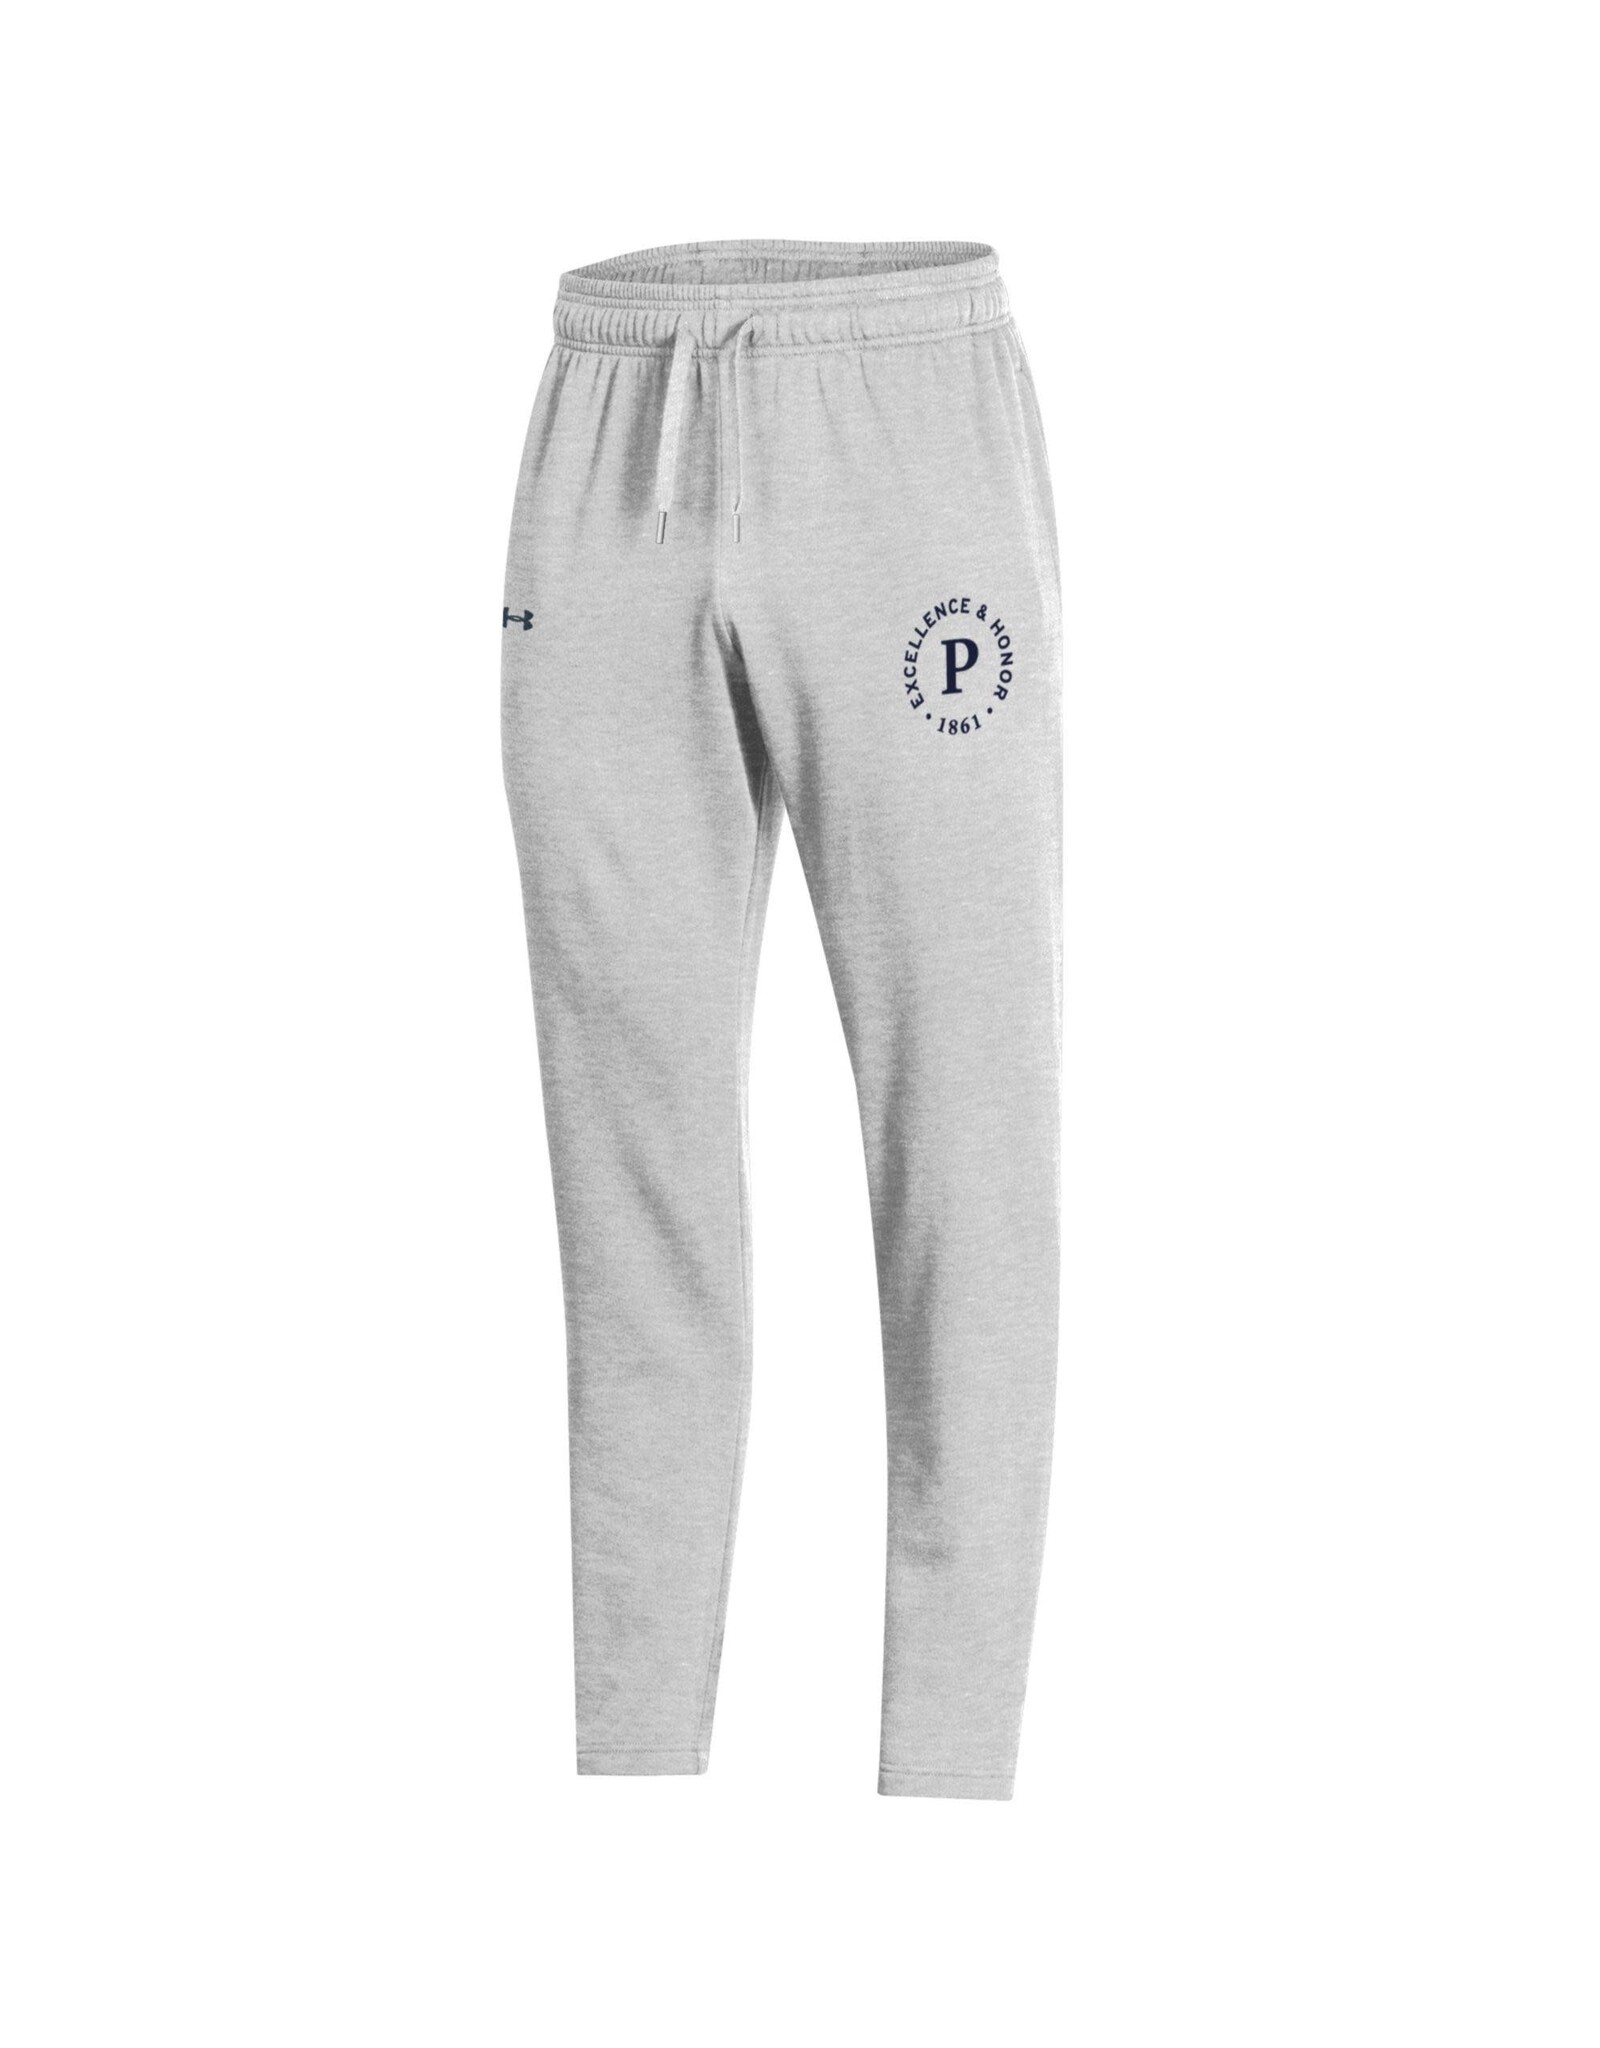 Under Armour Men's All Day Pant